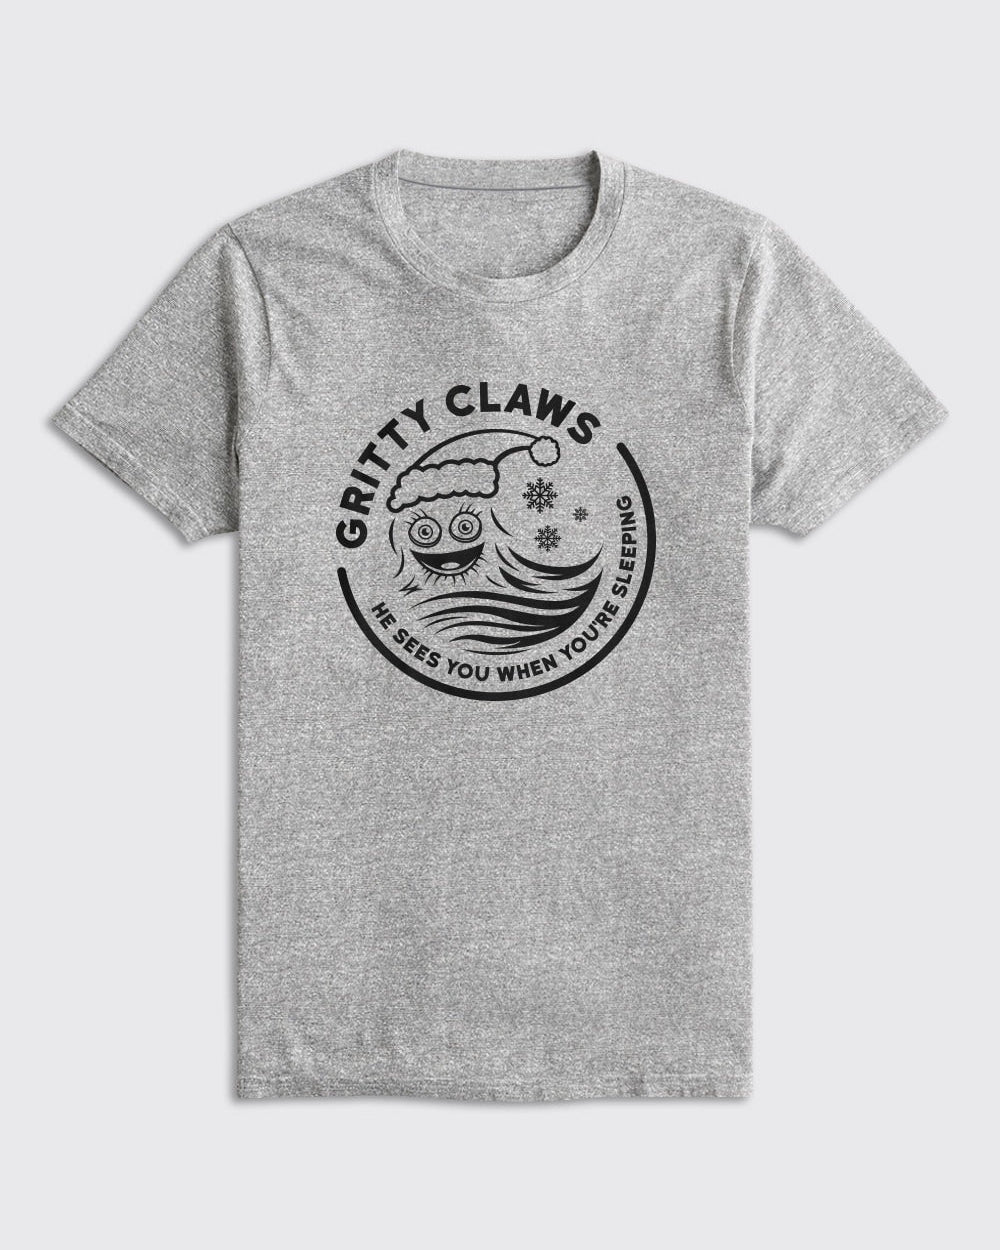 Gritty Claws Shirt - Flyers, T-Shirts - Philly Sports Shirts